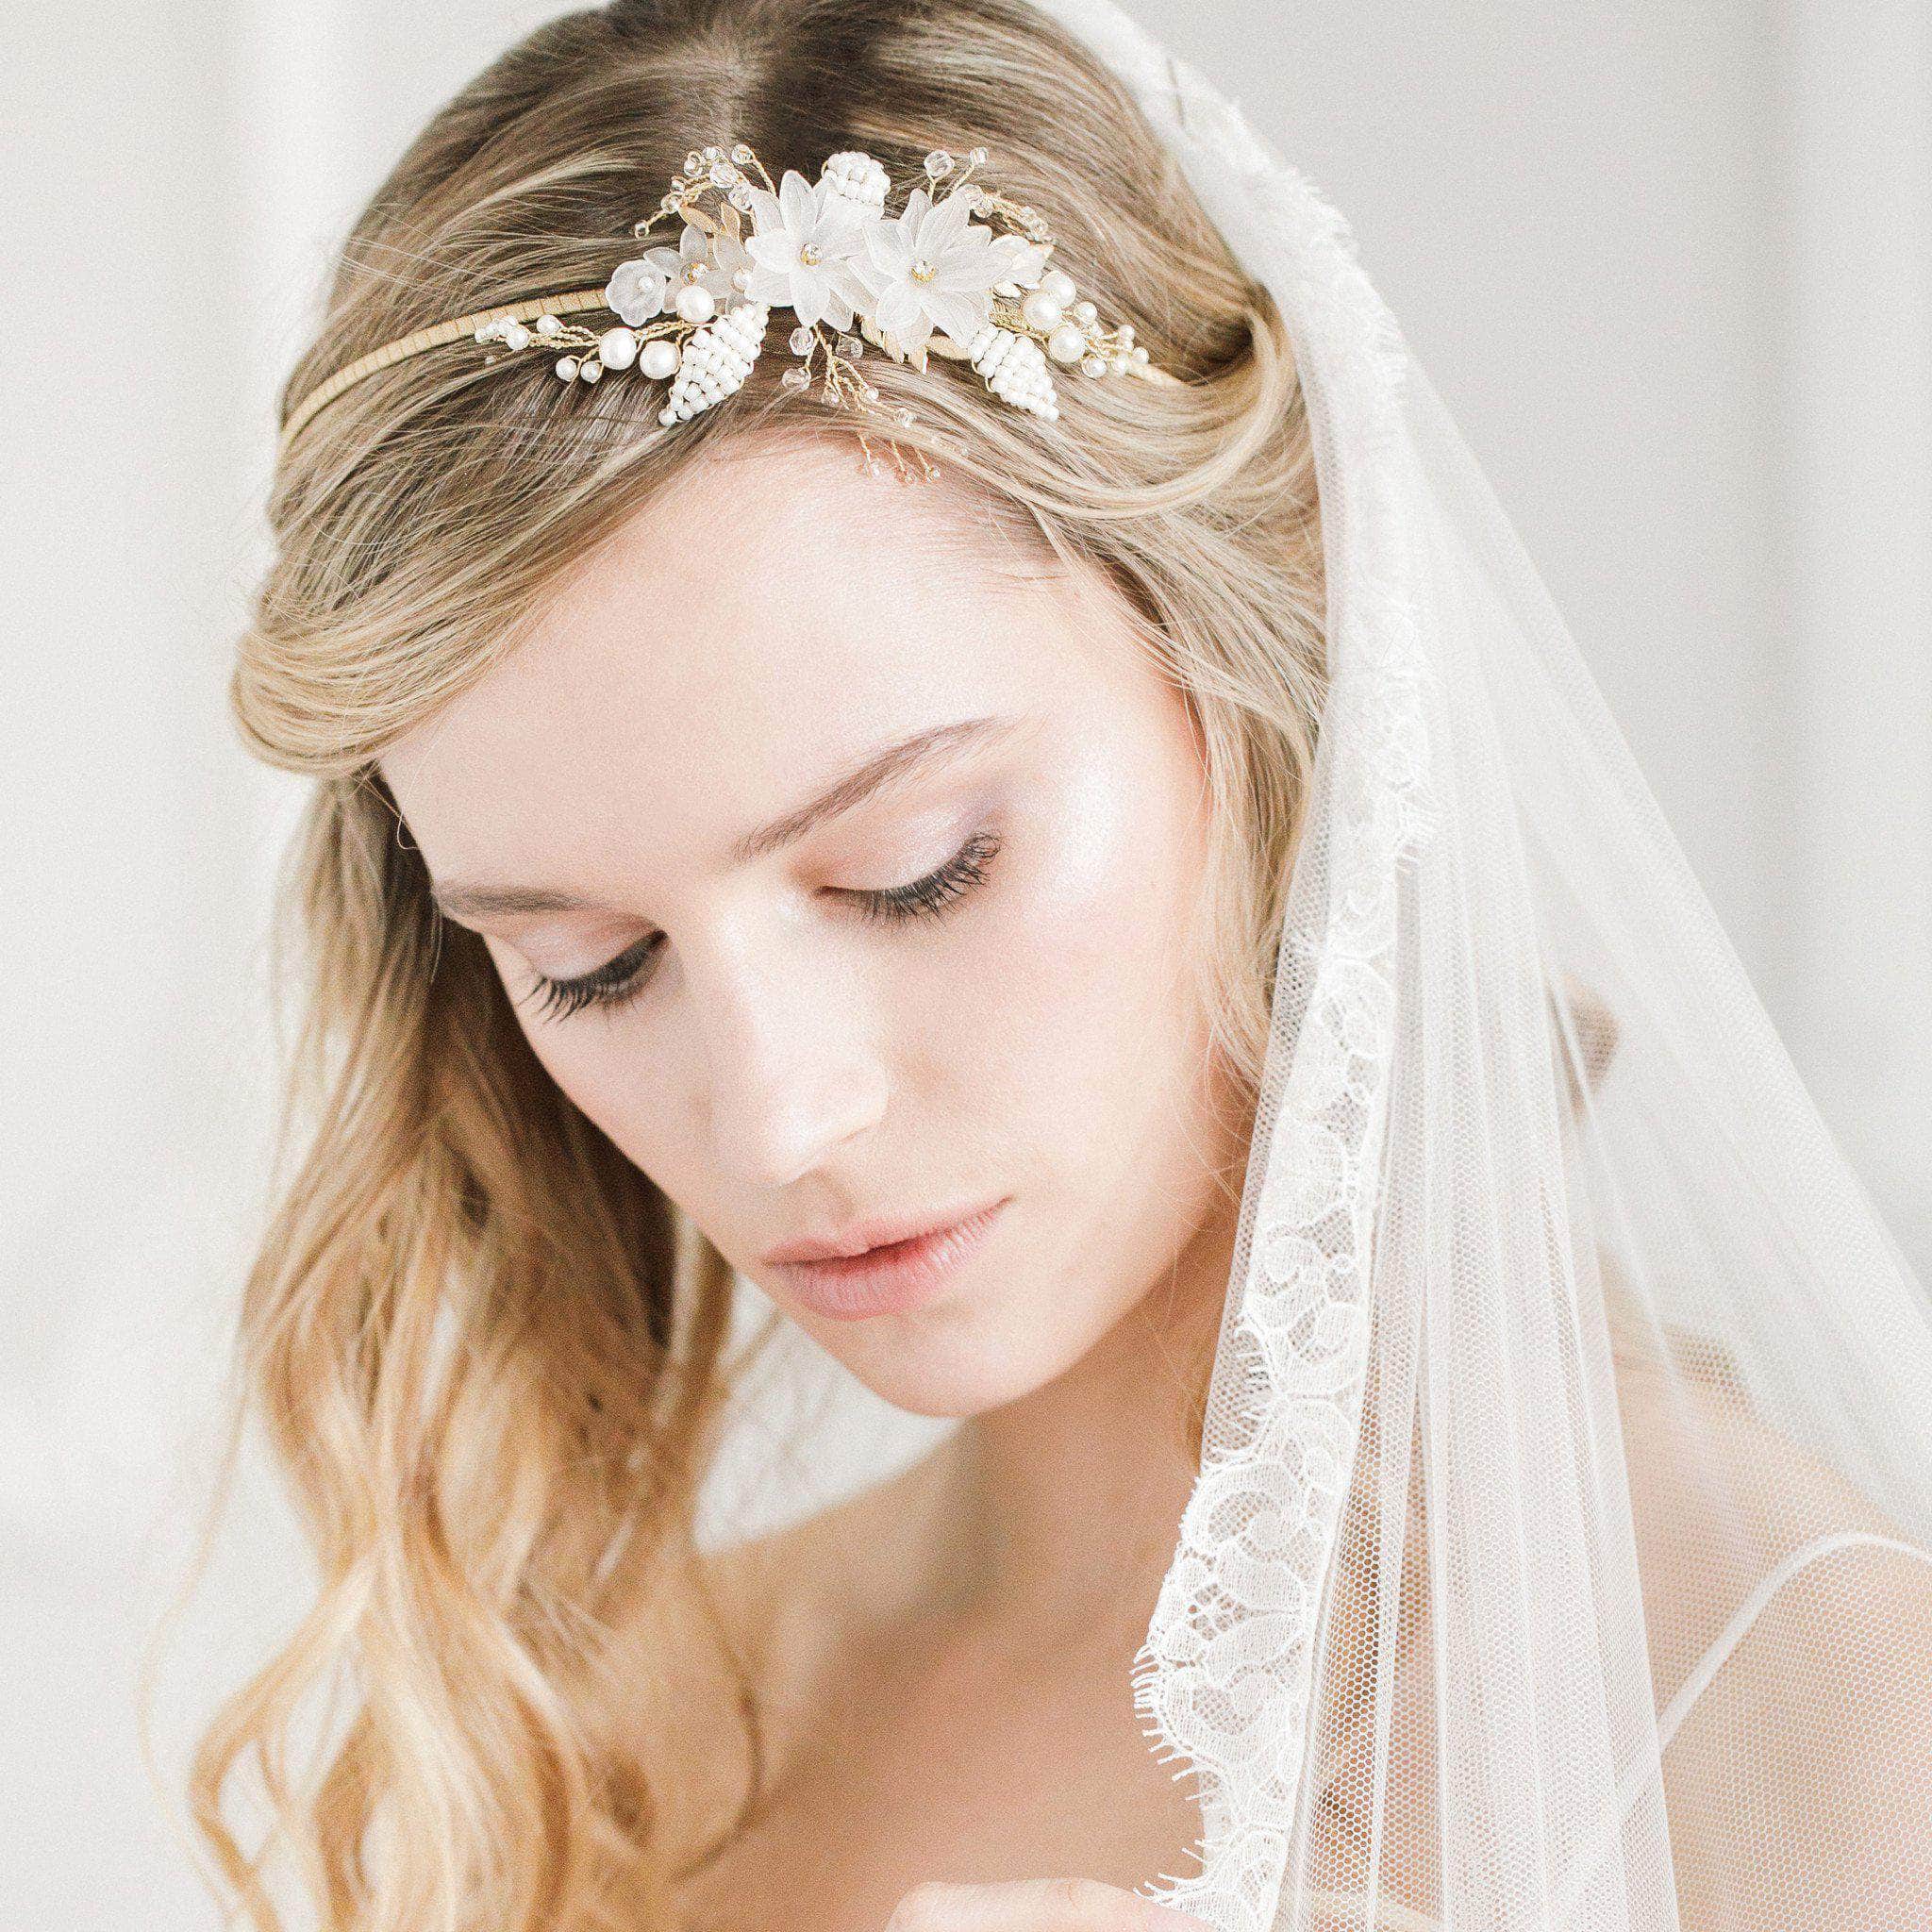 How To Choose A Bridal Headpiece